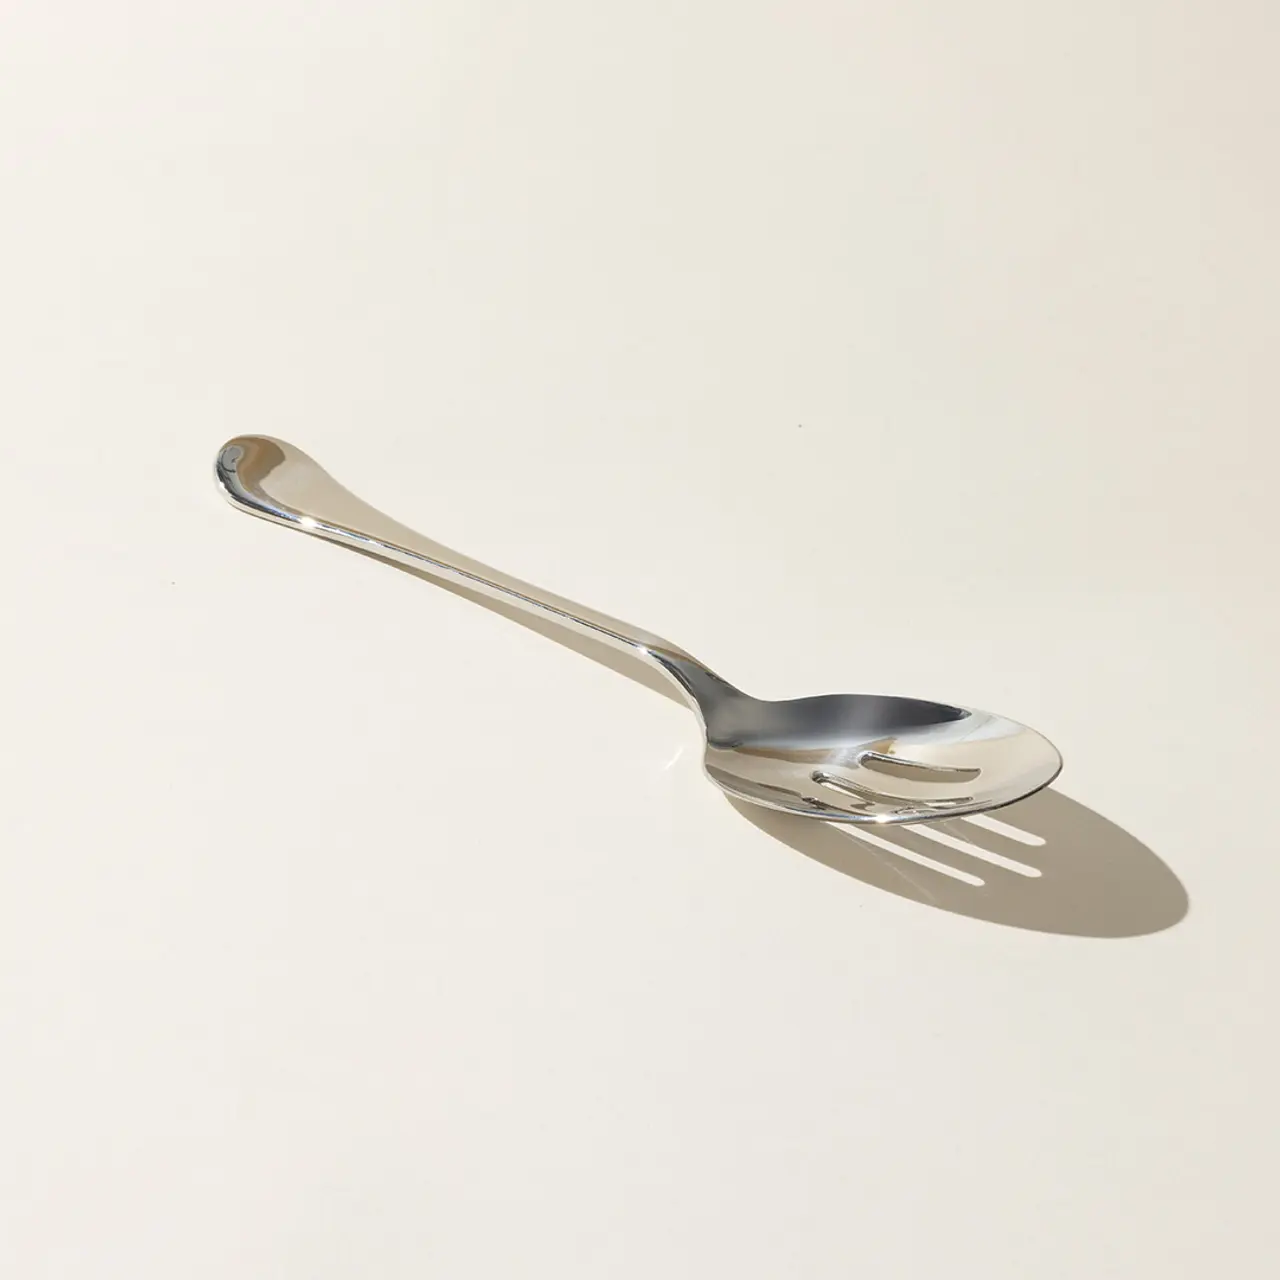 A stainless steel spork, combining features of both a spoon and a fork, casts a shadow on a light-colored surface.